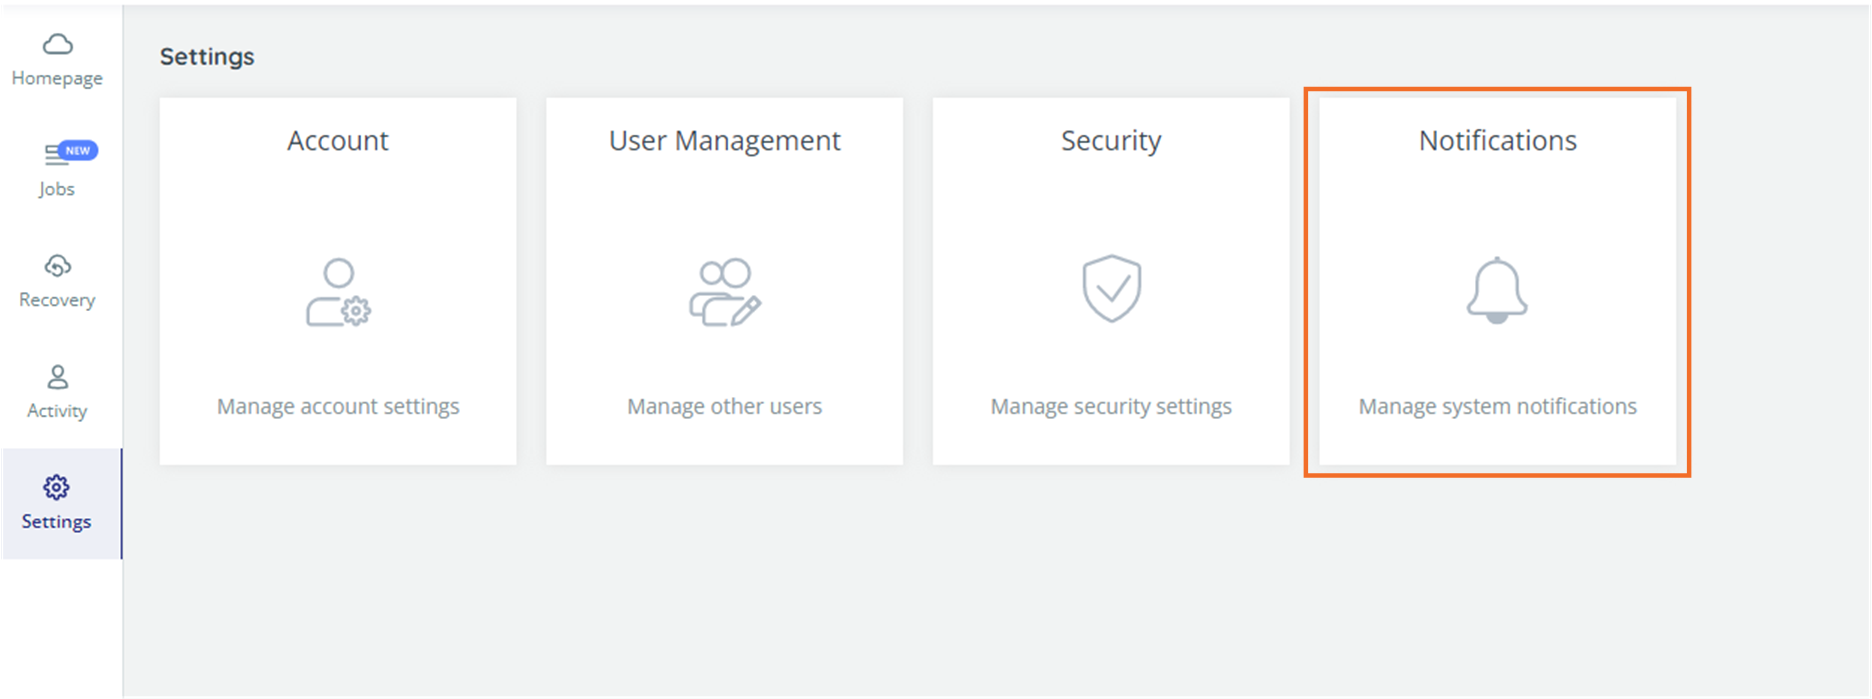 Security Settings page, with Notifications option highlighted